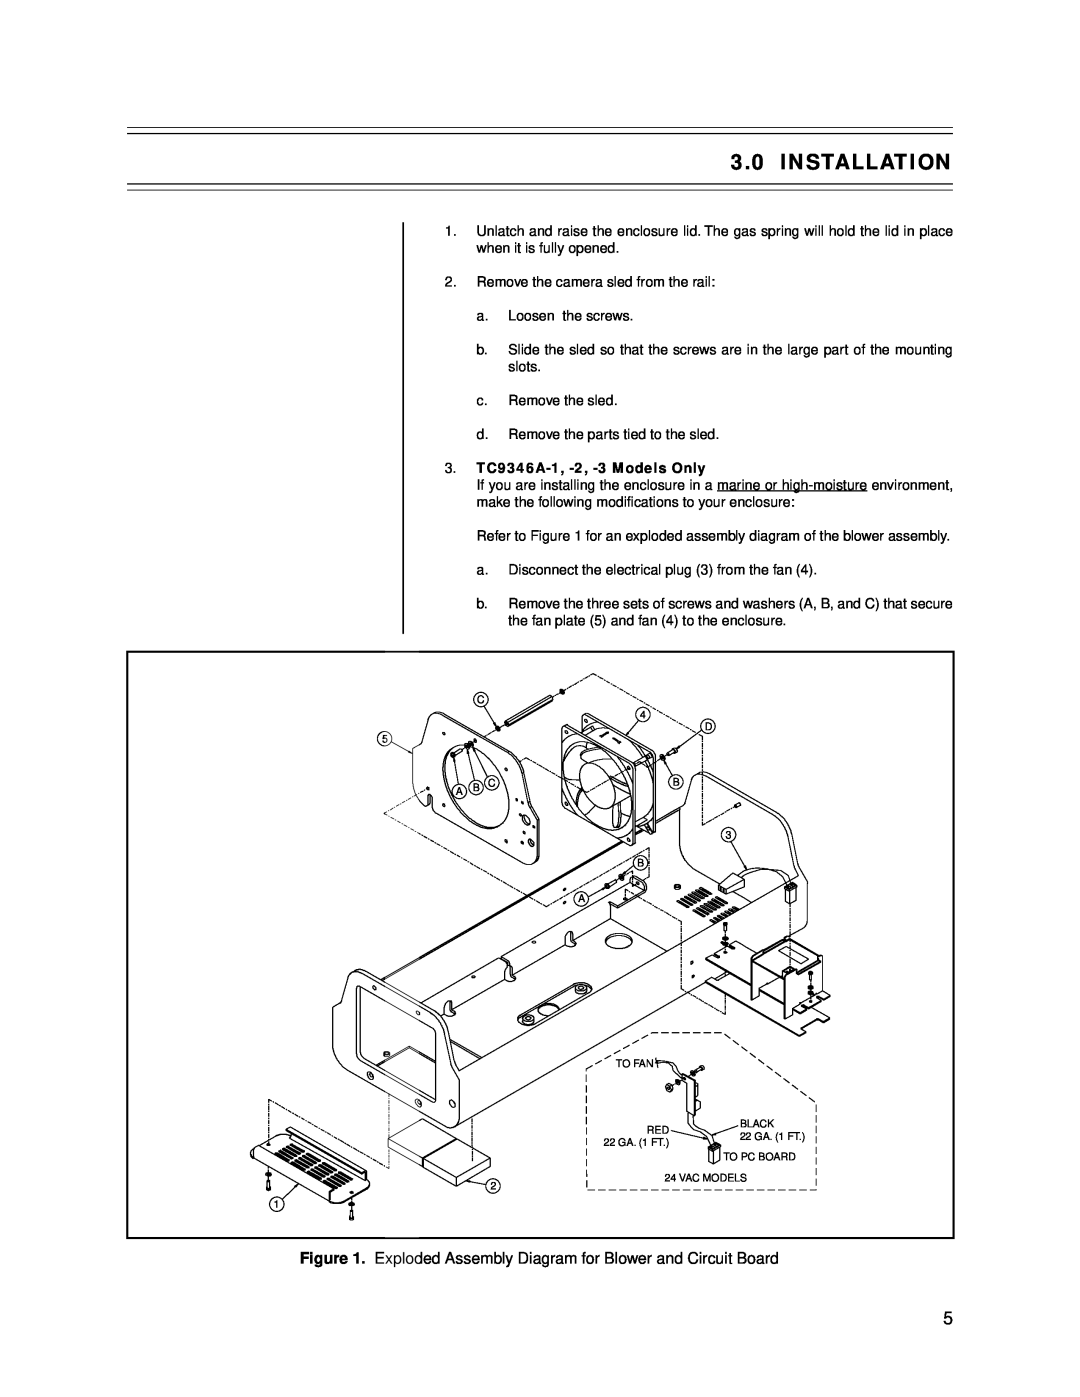 Bosch Appliances tc9346a instruction manual Installation, Exploded Assembly Diagram for Blower and Circuit Board 